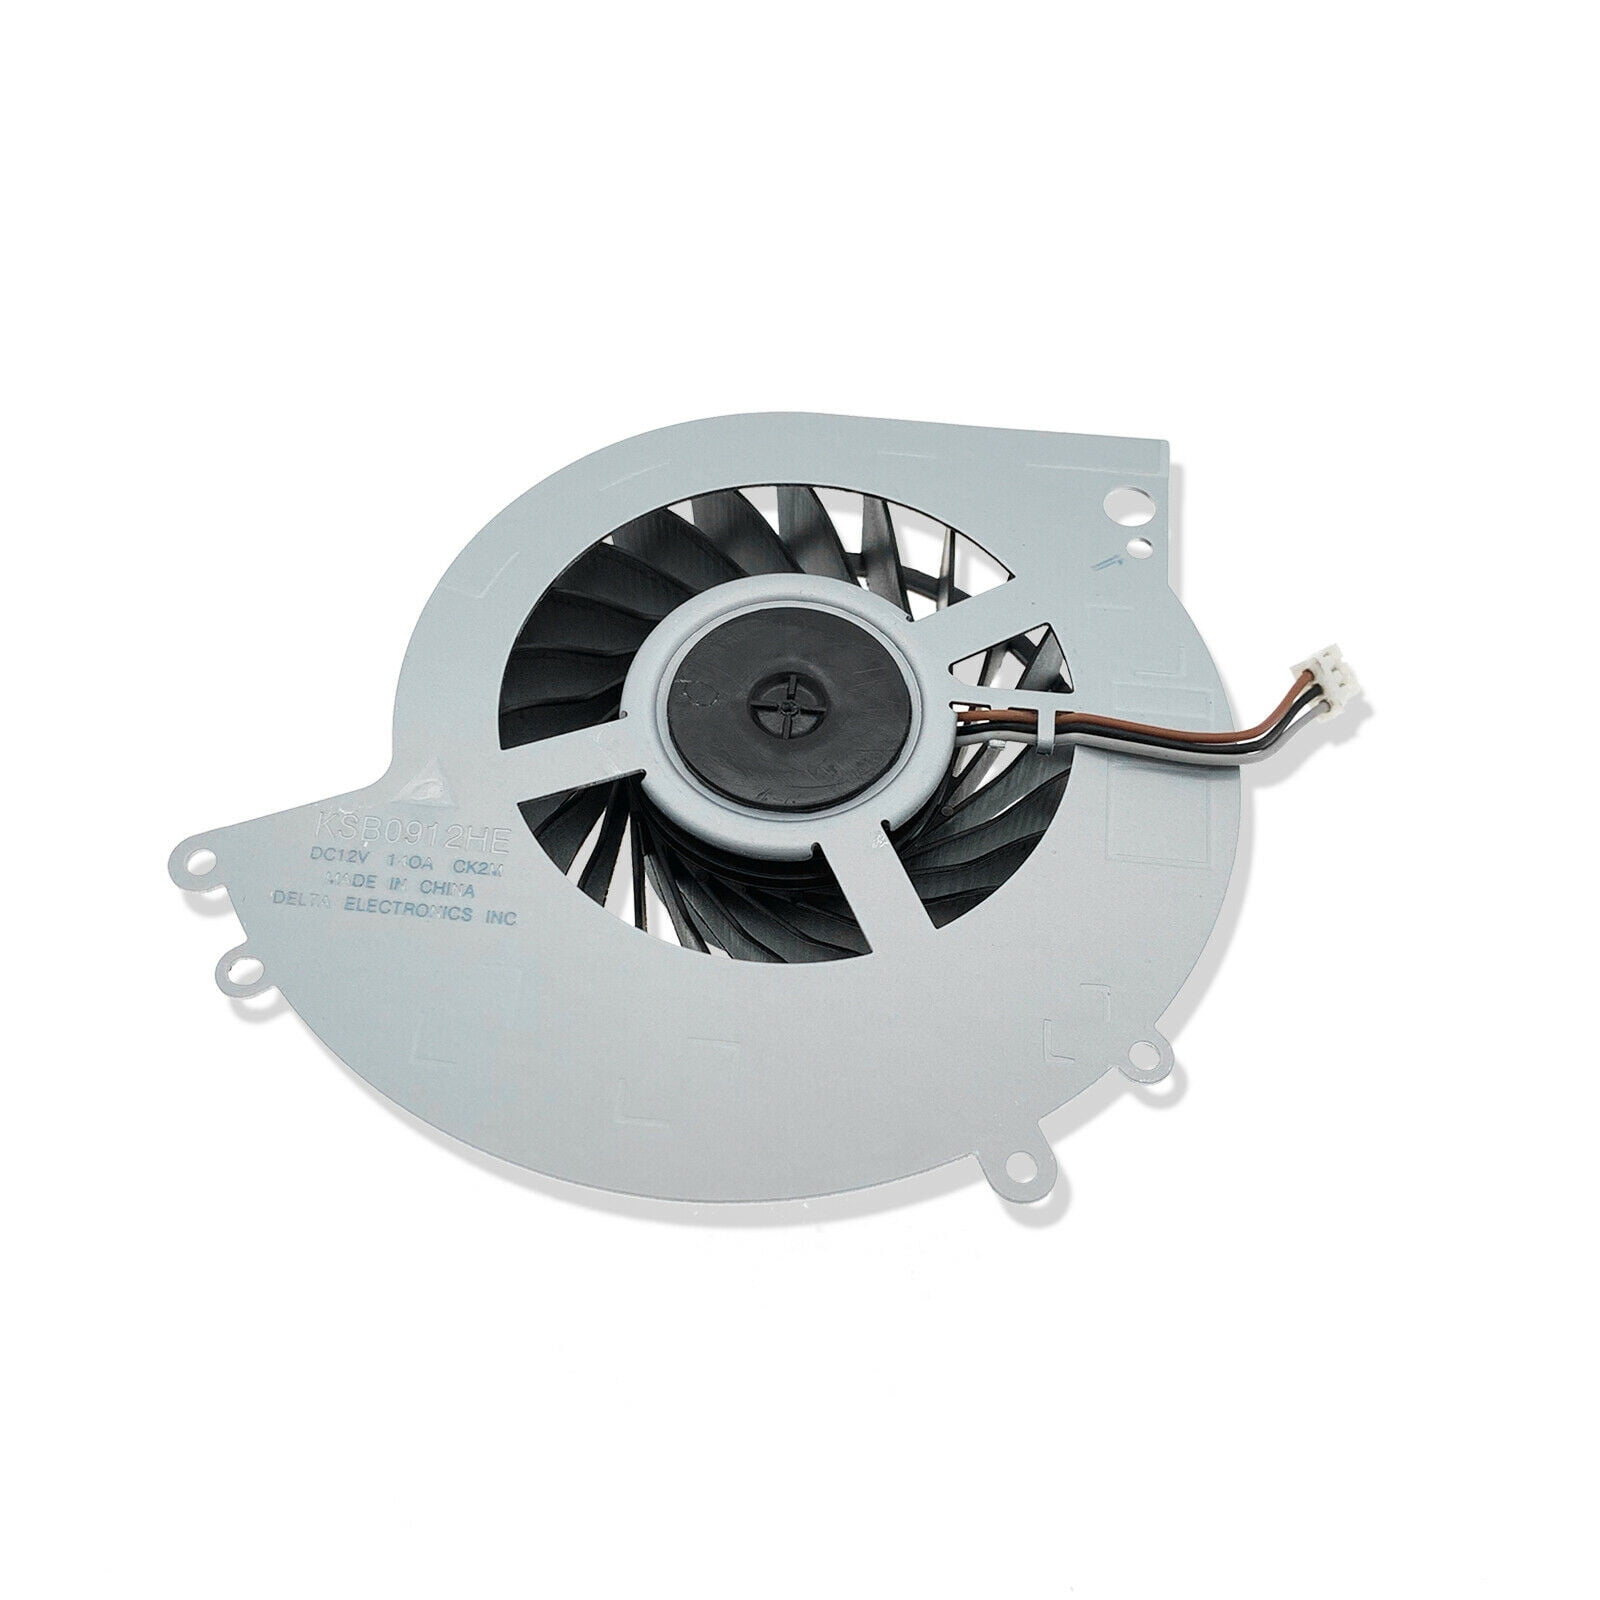 Nedsænkning Skrivemaskine Venture For Sony PlayStation 4 PS4-1200 CUH-1215A Replacement Cooling Fan  G85B12MS1BN - Walmart.com